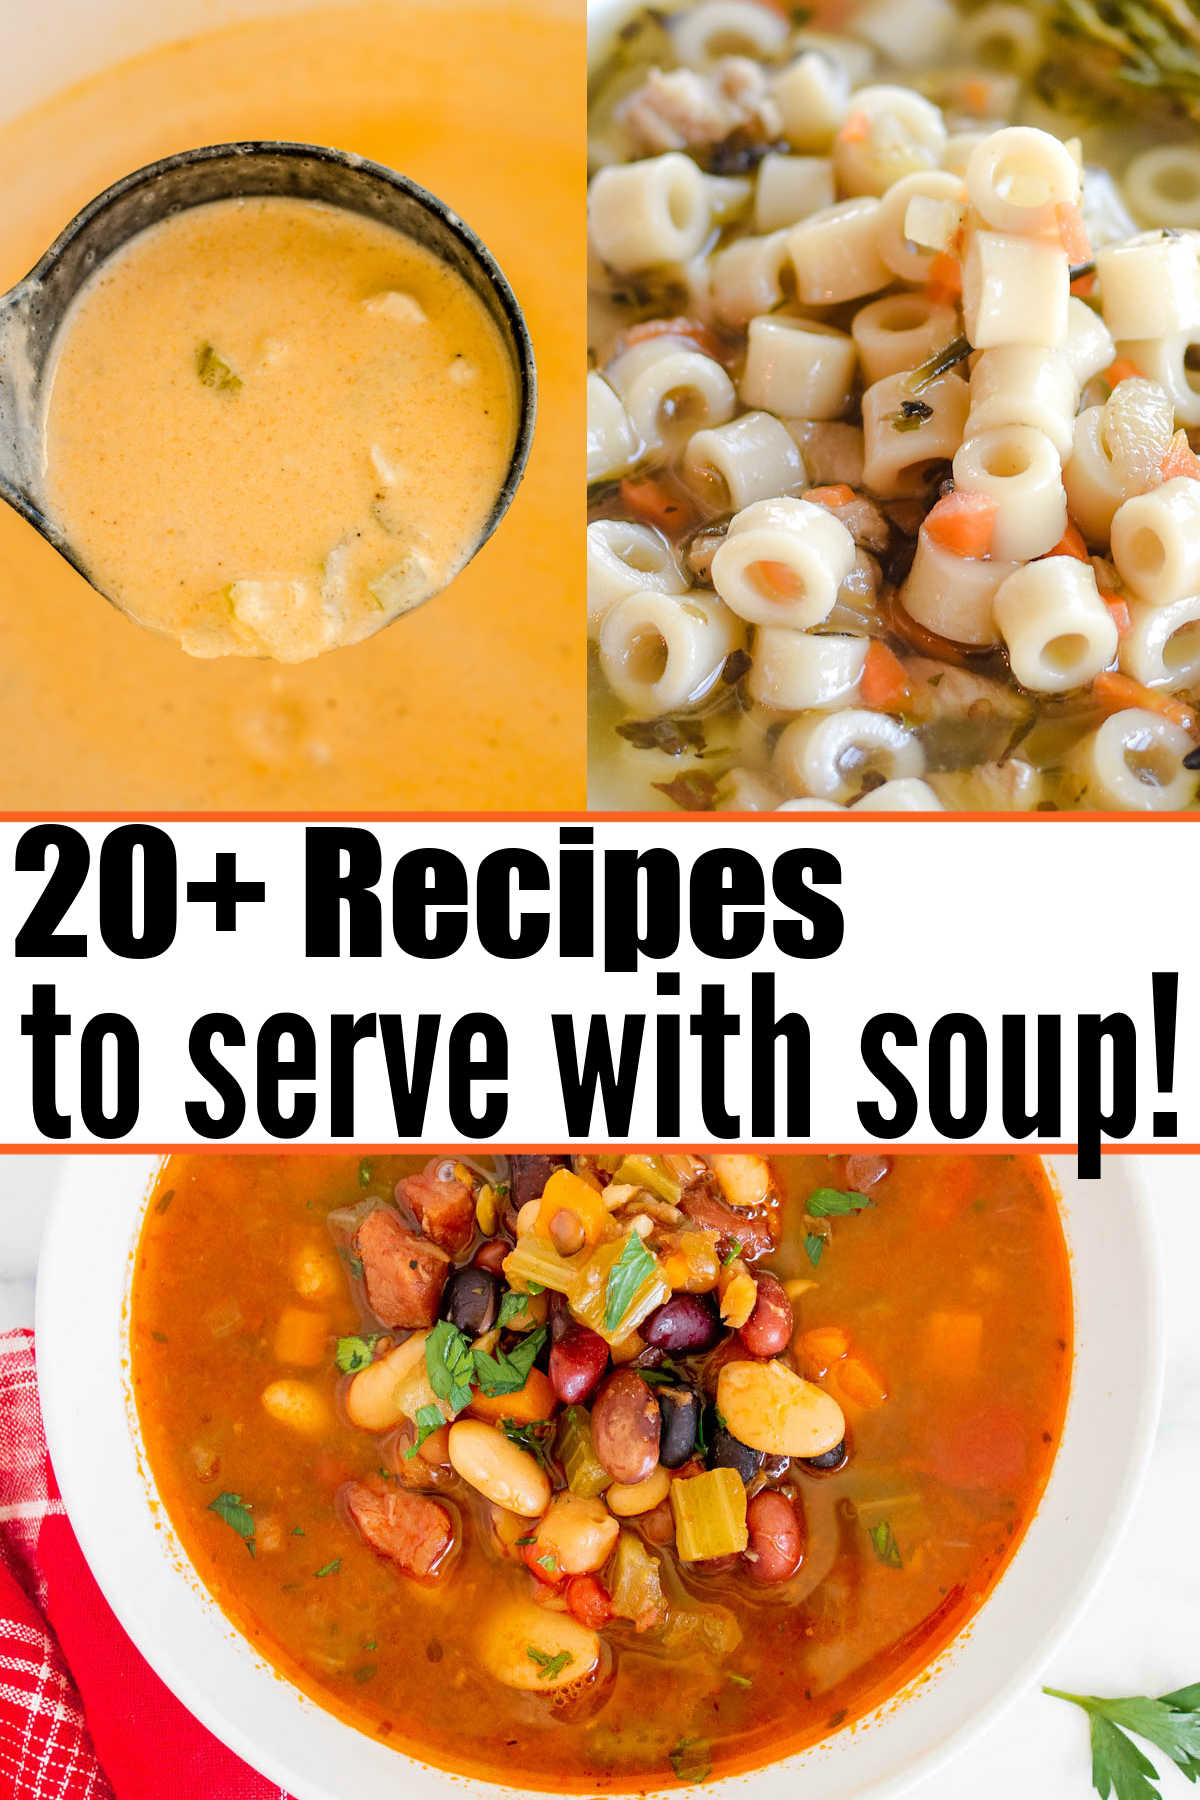 Image collage of soups - with text that says "20+ Recipes to Serve with Soup"